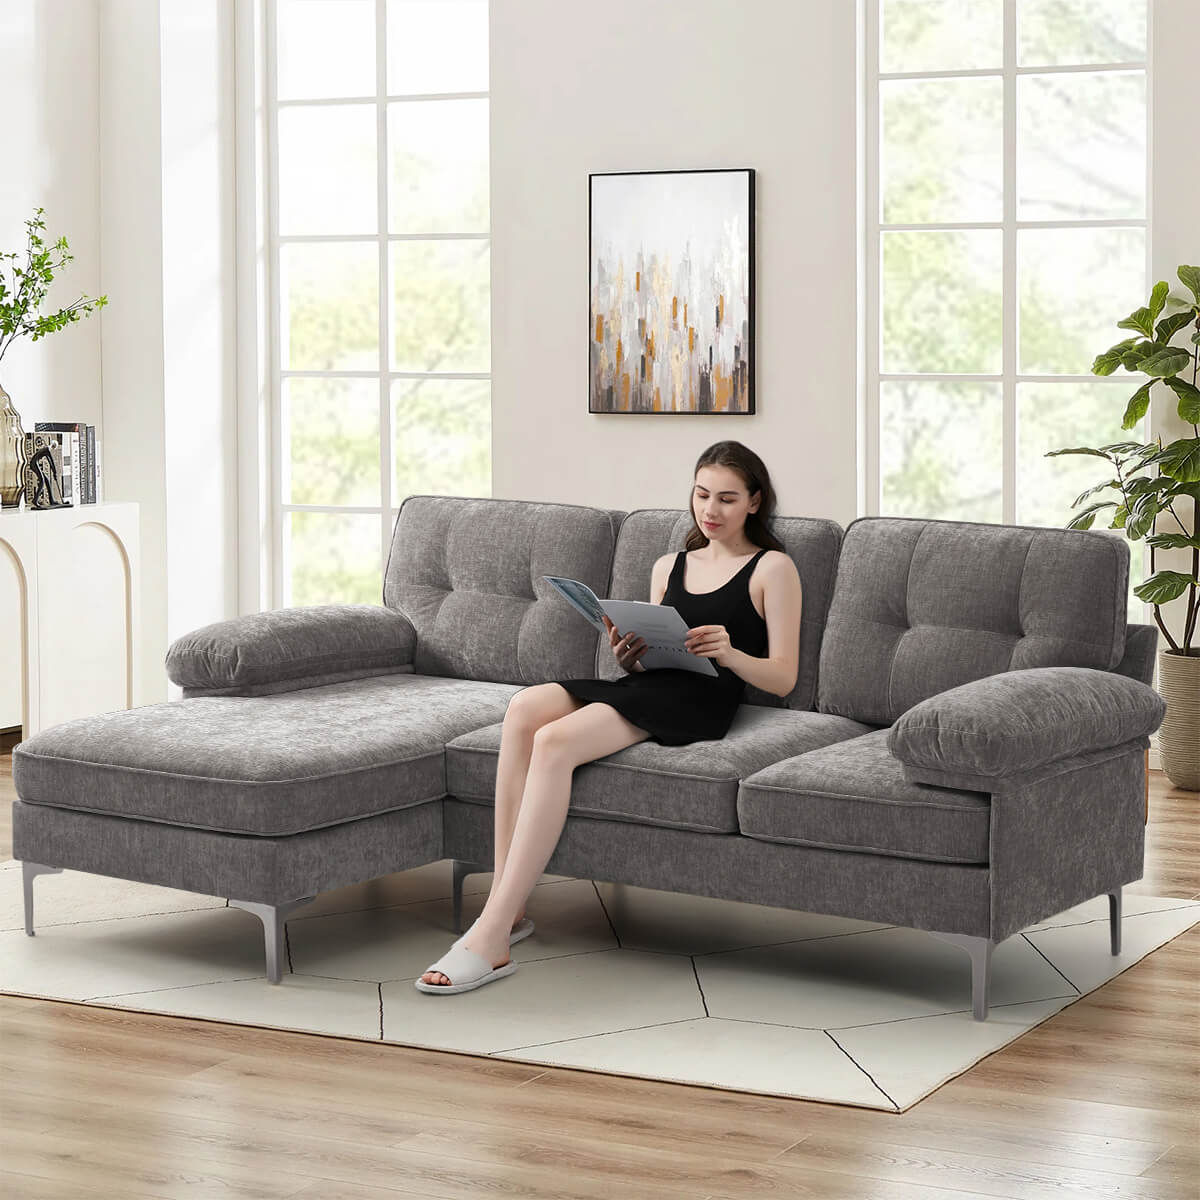 Convertible Sectional Sofa 83" L Shaped Couch with Reversible Chaise, Chenille Fabric